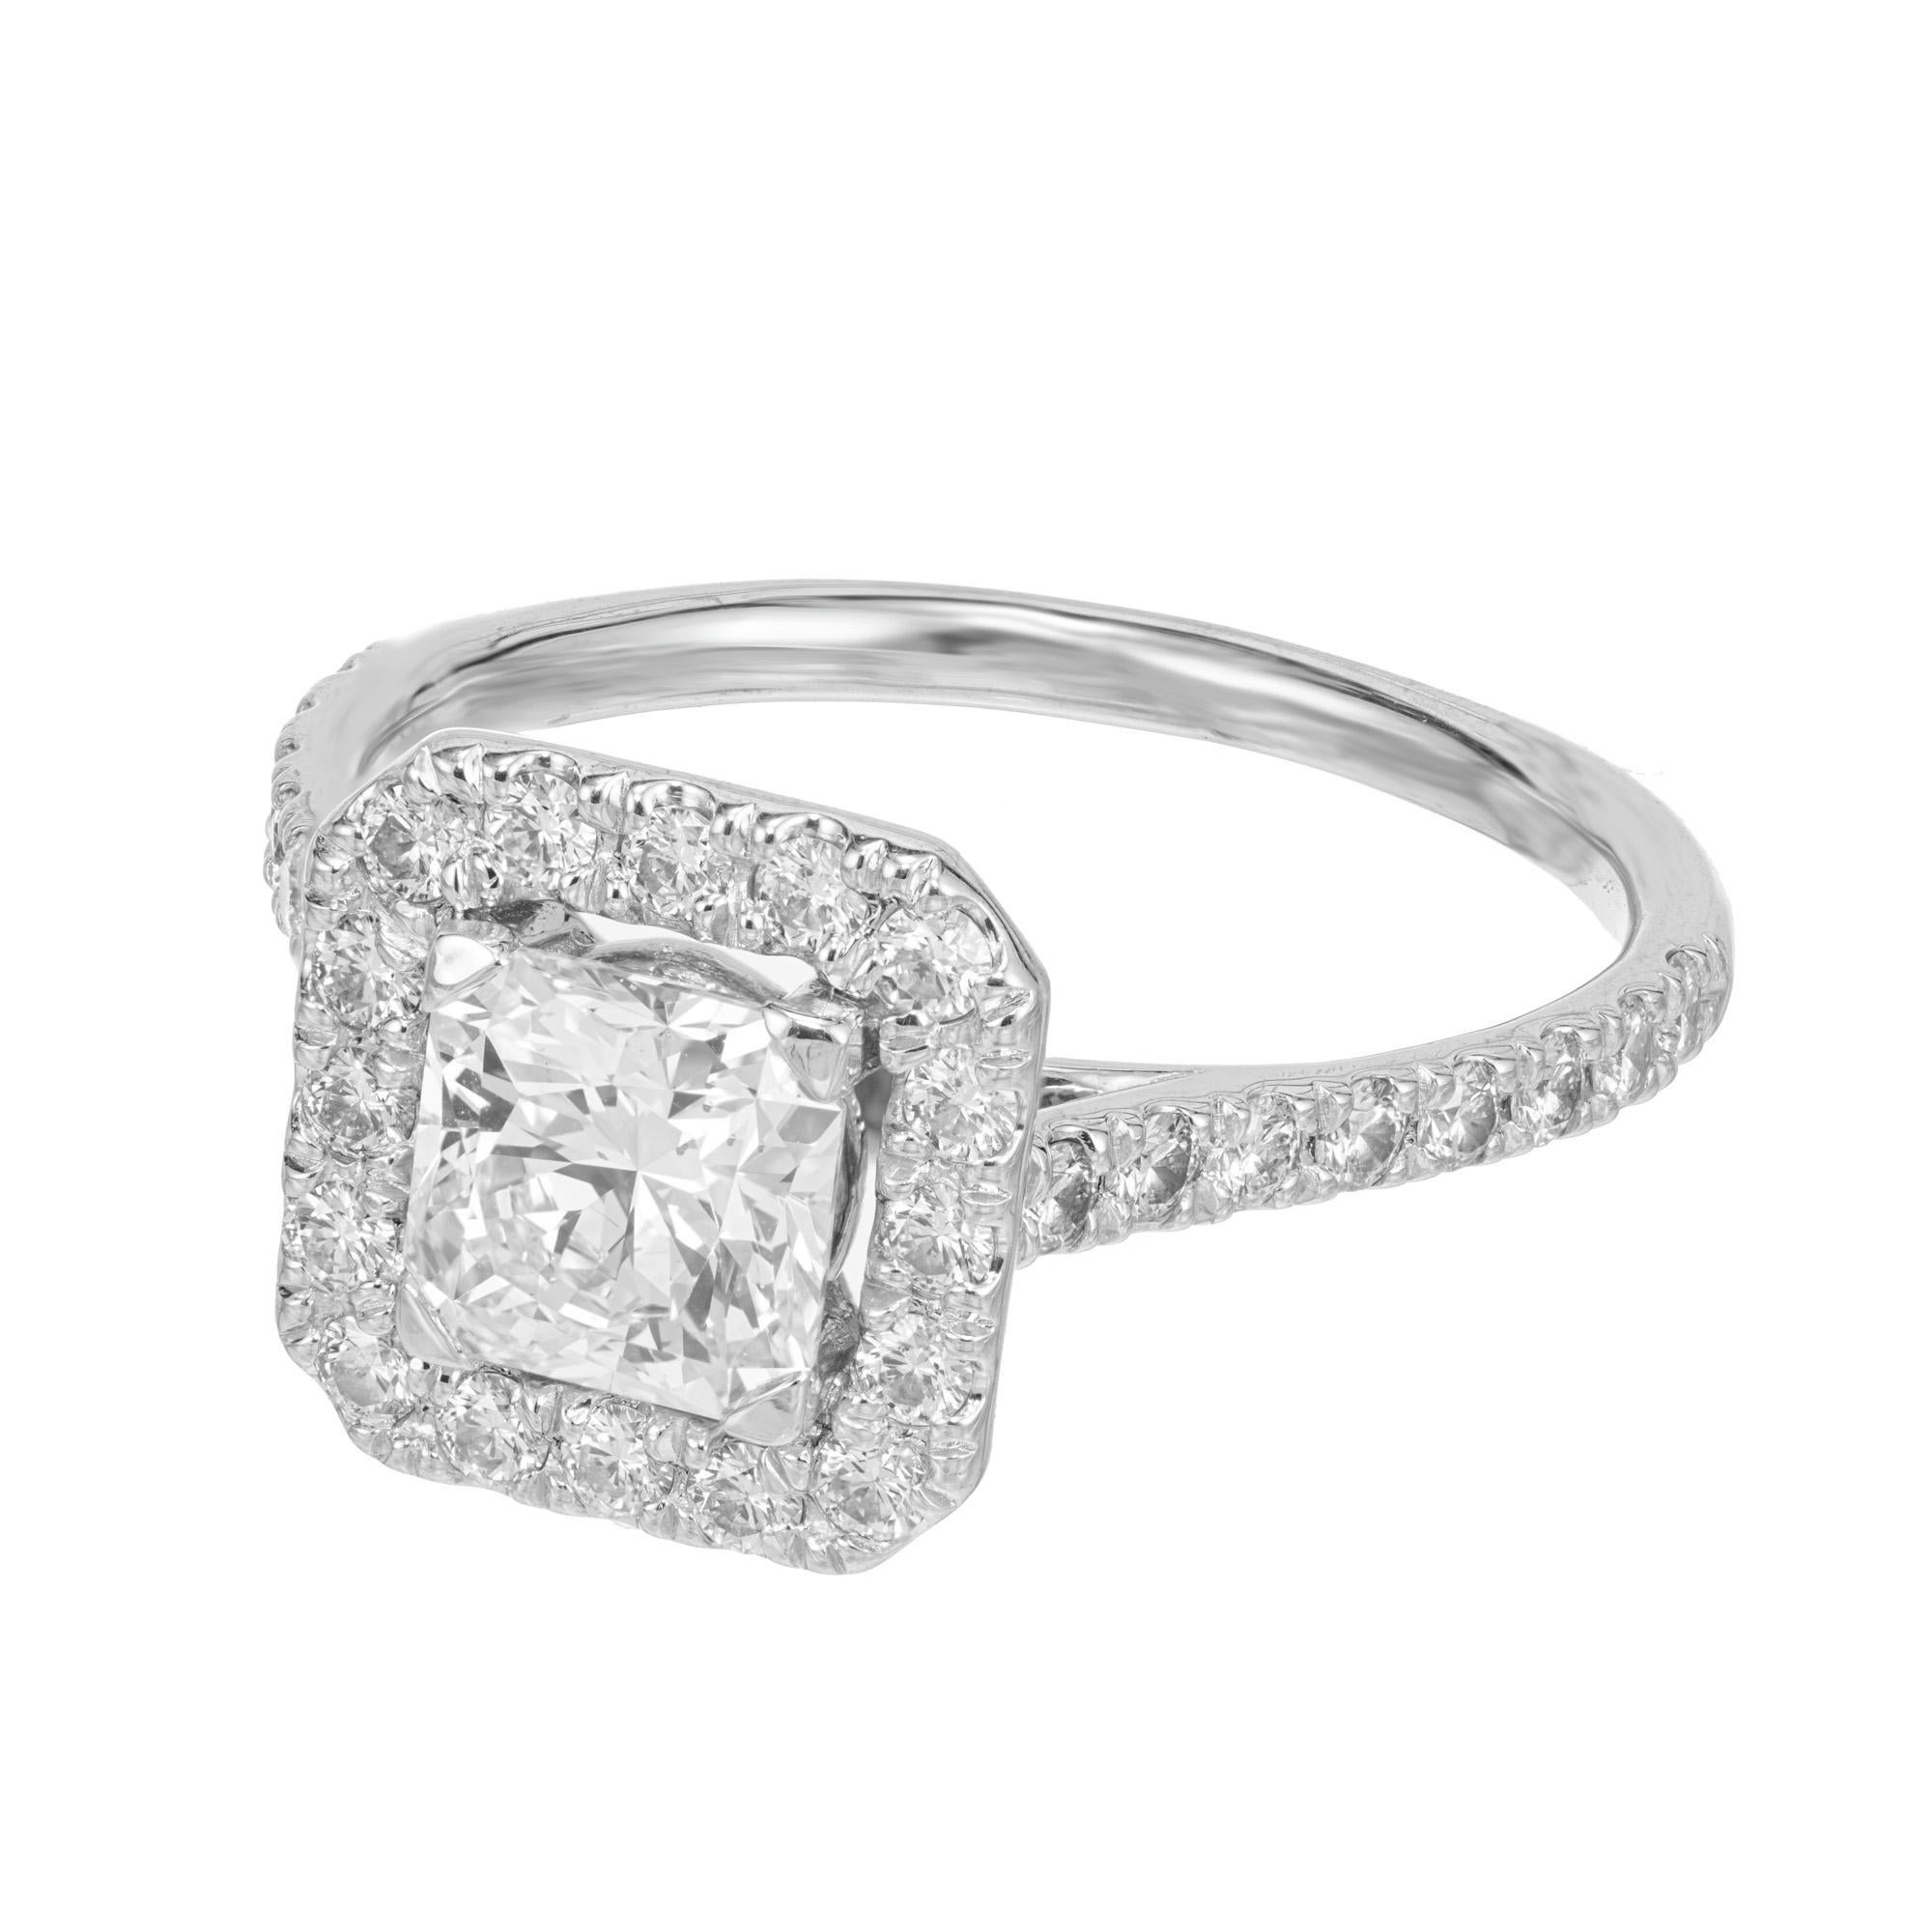 Hearts on Fire Dream Transcend diamond halo engagement ring. The GIA certified corner cut, squared brilliant shape 1.18 carat is inscribed Dream 9820 and graded F (colorless) and VS1 (very slightly included) clarity. Set in a platinum setting with